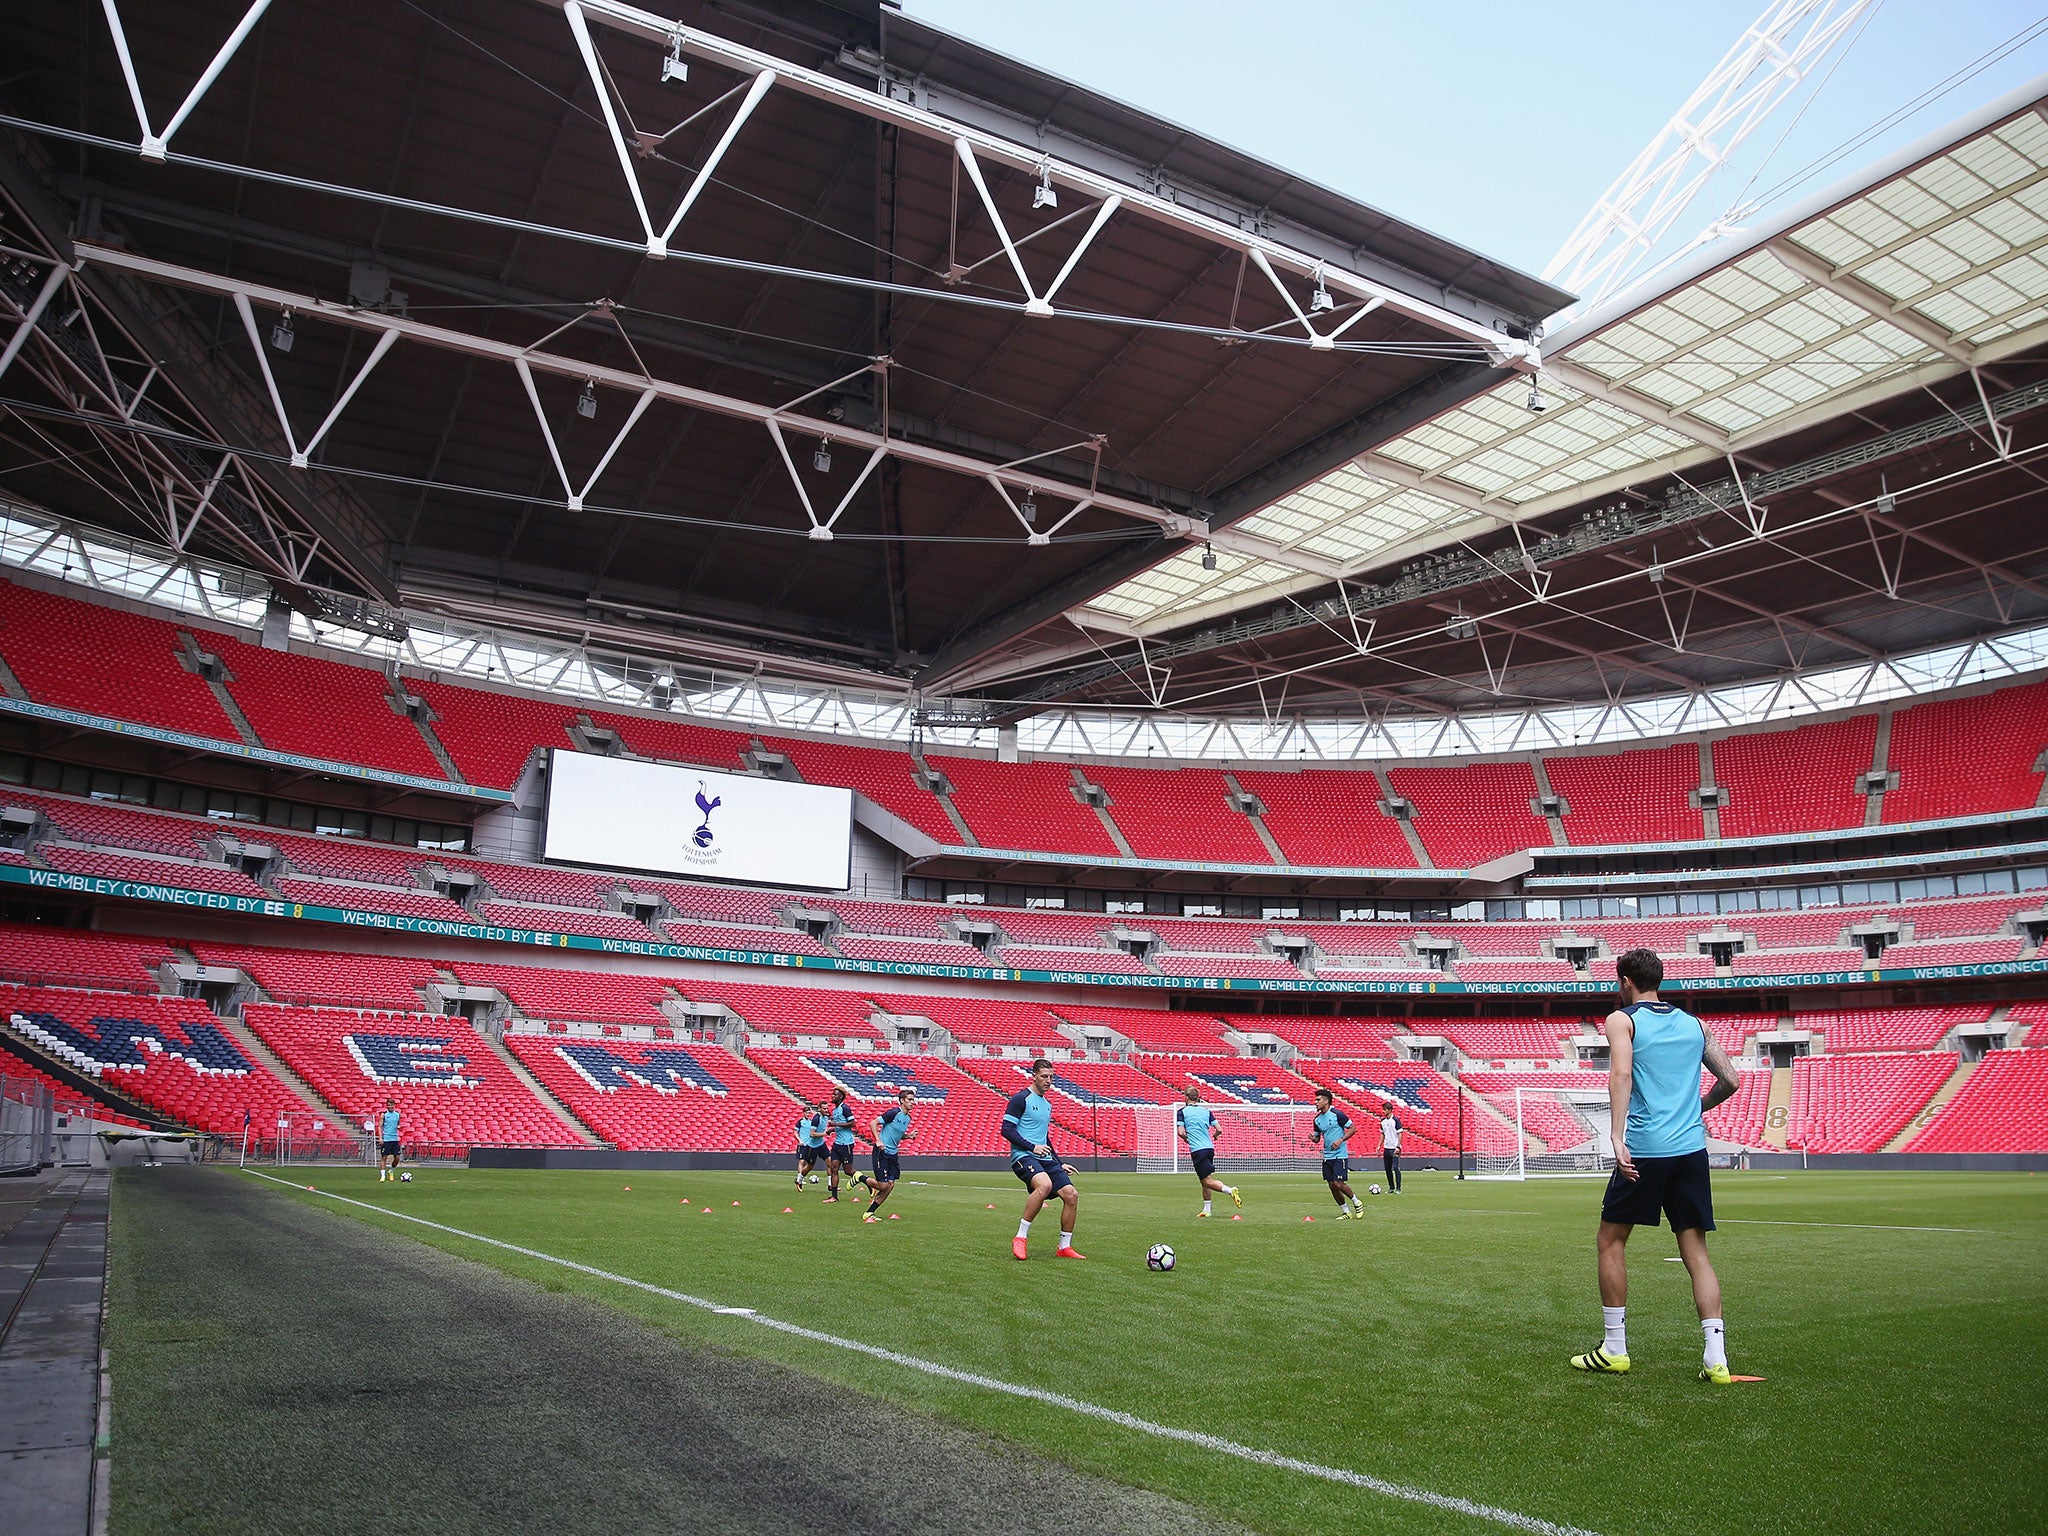 Tottenham get used to the feel of the Wembley pitch ahead of Wednesday night's Champions League clash